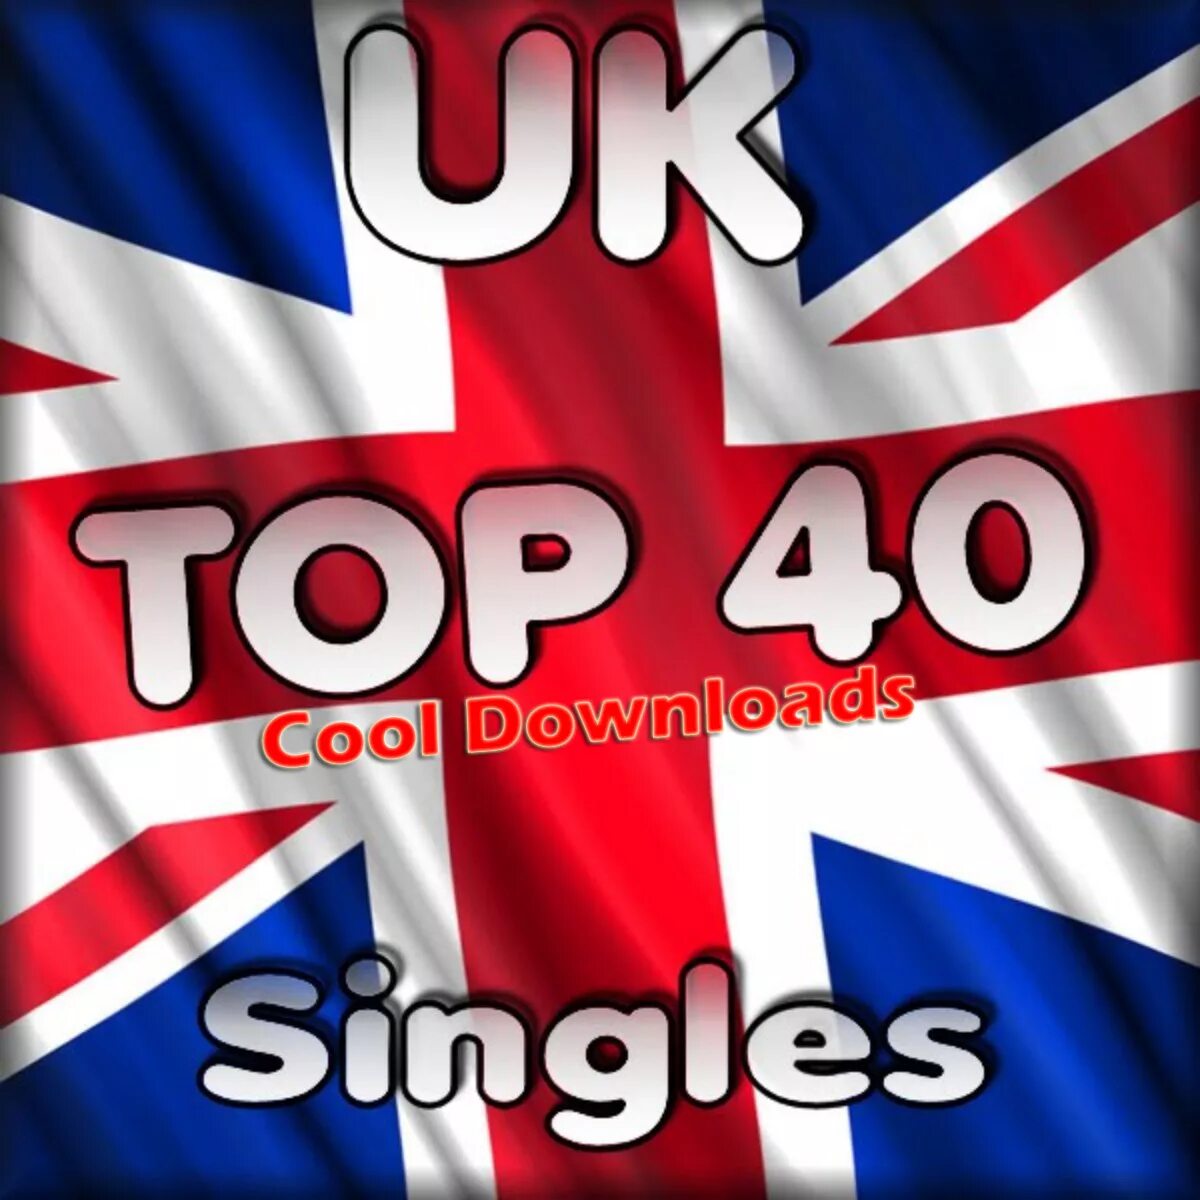 Uk singles. Uk Top 40 Singles Chart. The Official uk Top 40. Uk Singles Chart фото. Singles Top.